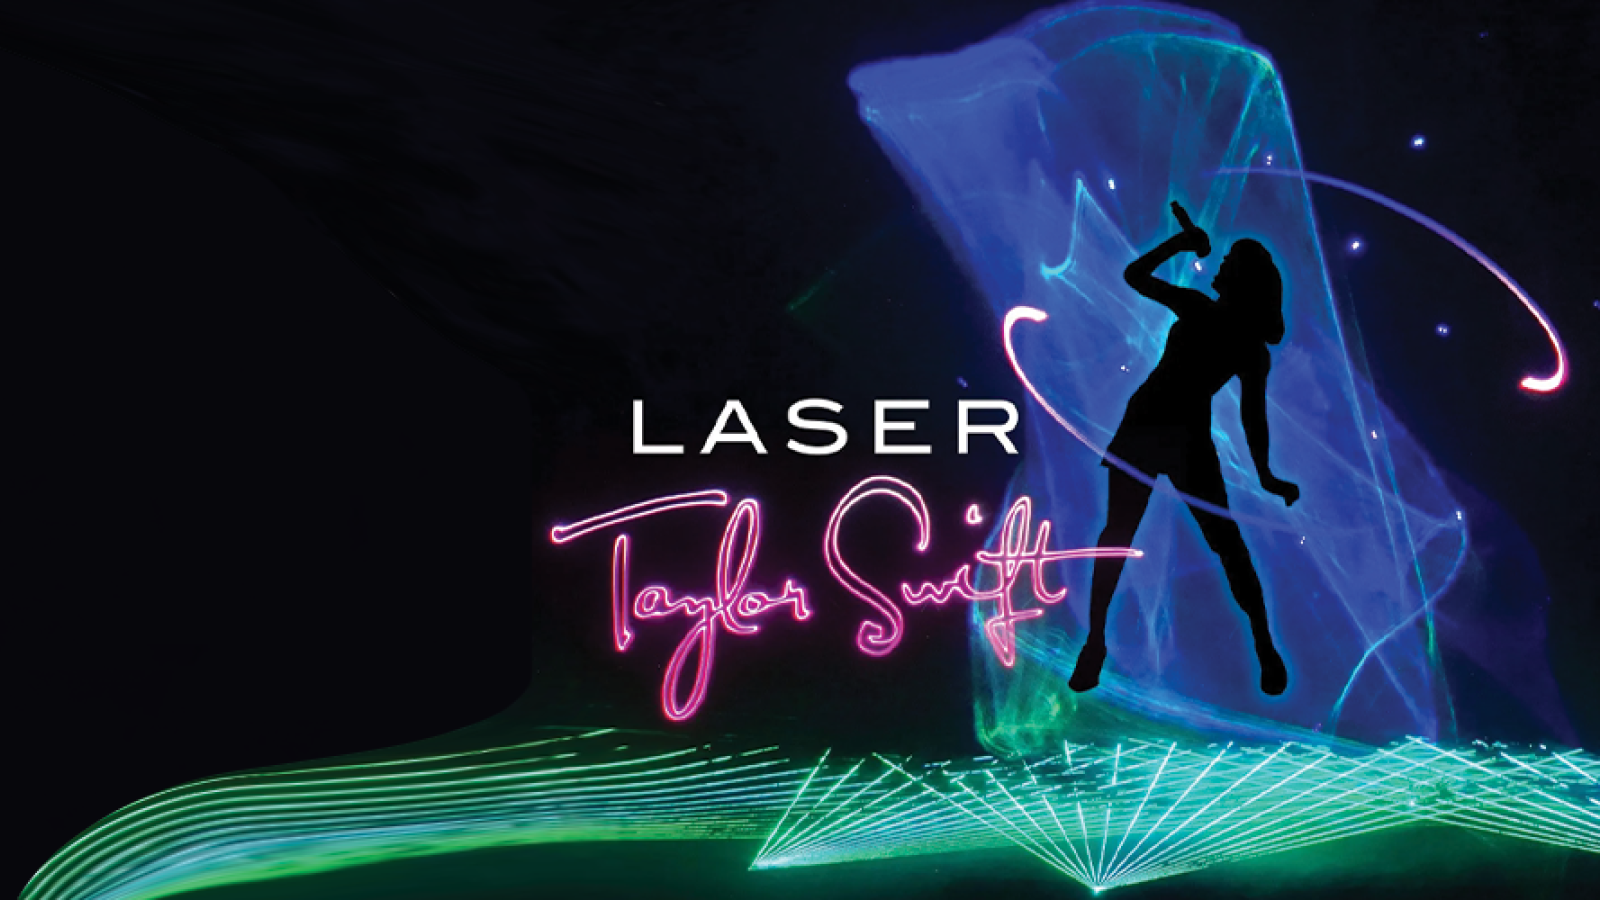 Laser Taylor Swift with green lasers and her silhouette in black against blue lasers